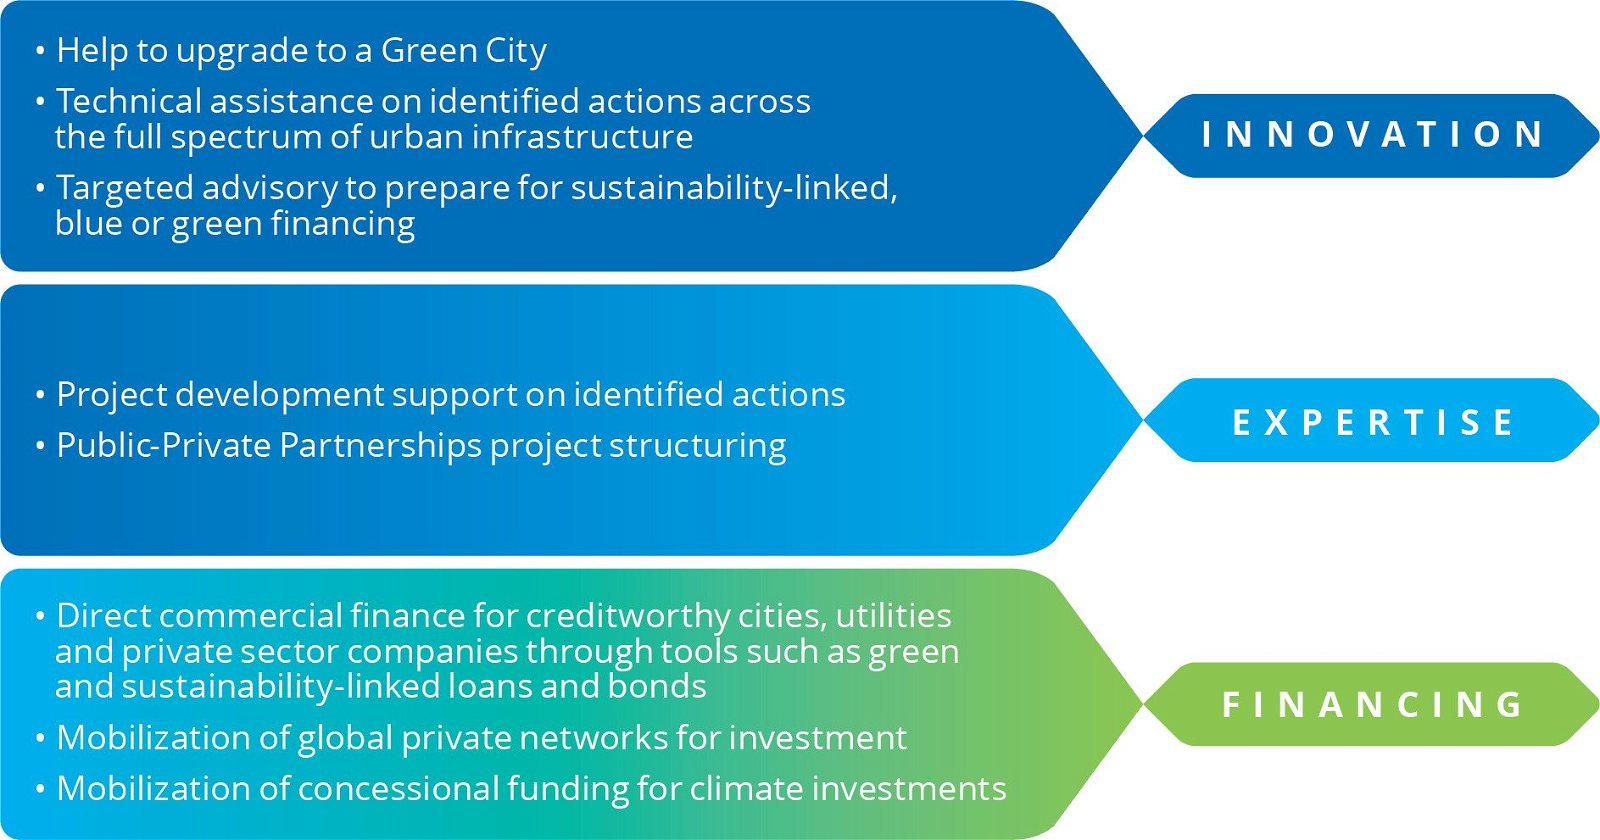 IFC helps cities across a broad range of advisory and investment solutions.